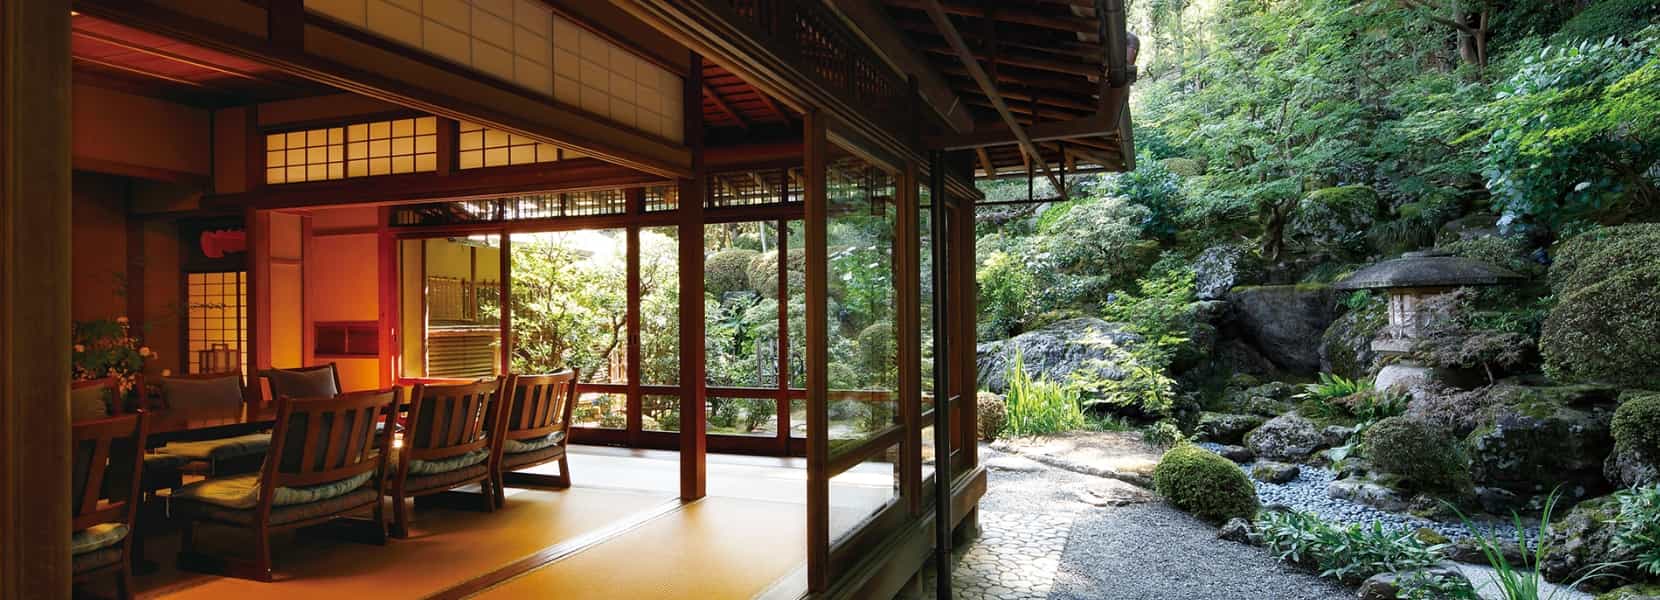 Tranquil Dining Experience in Japan